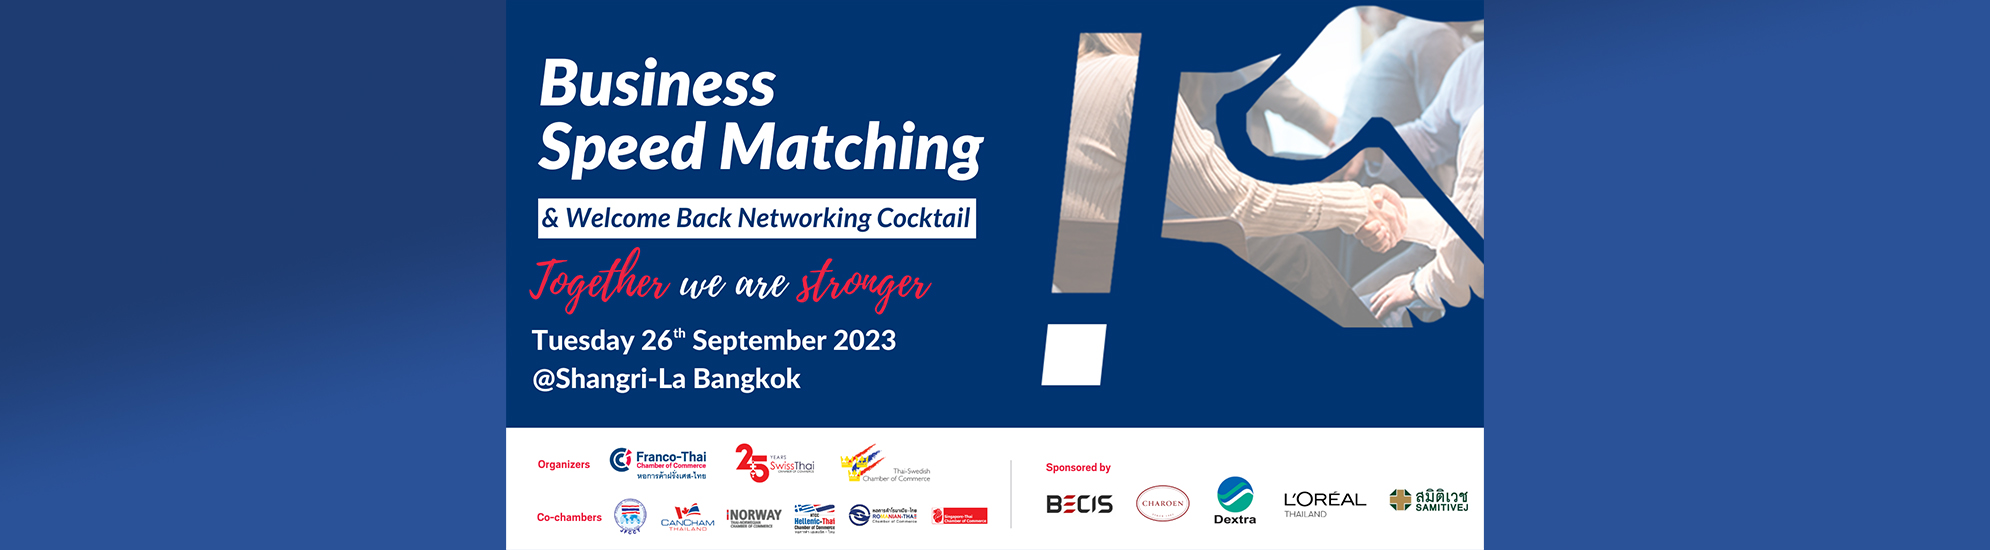 Business Speed Matching & Welcome Back Networking Cocktail